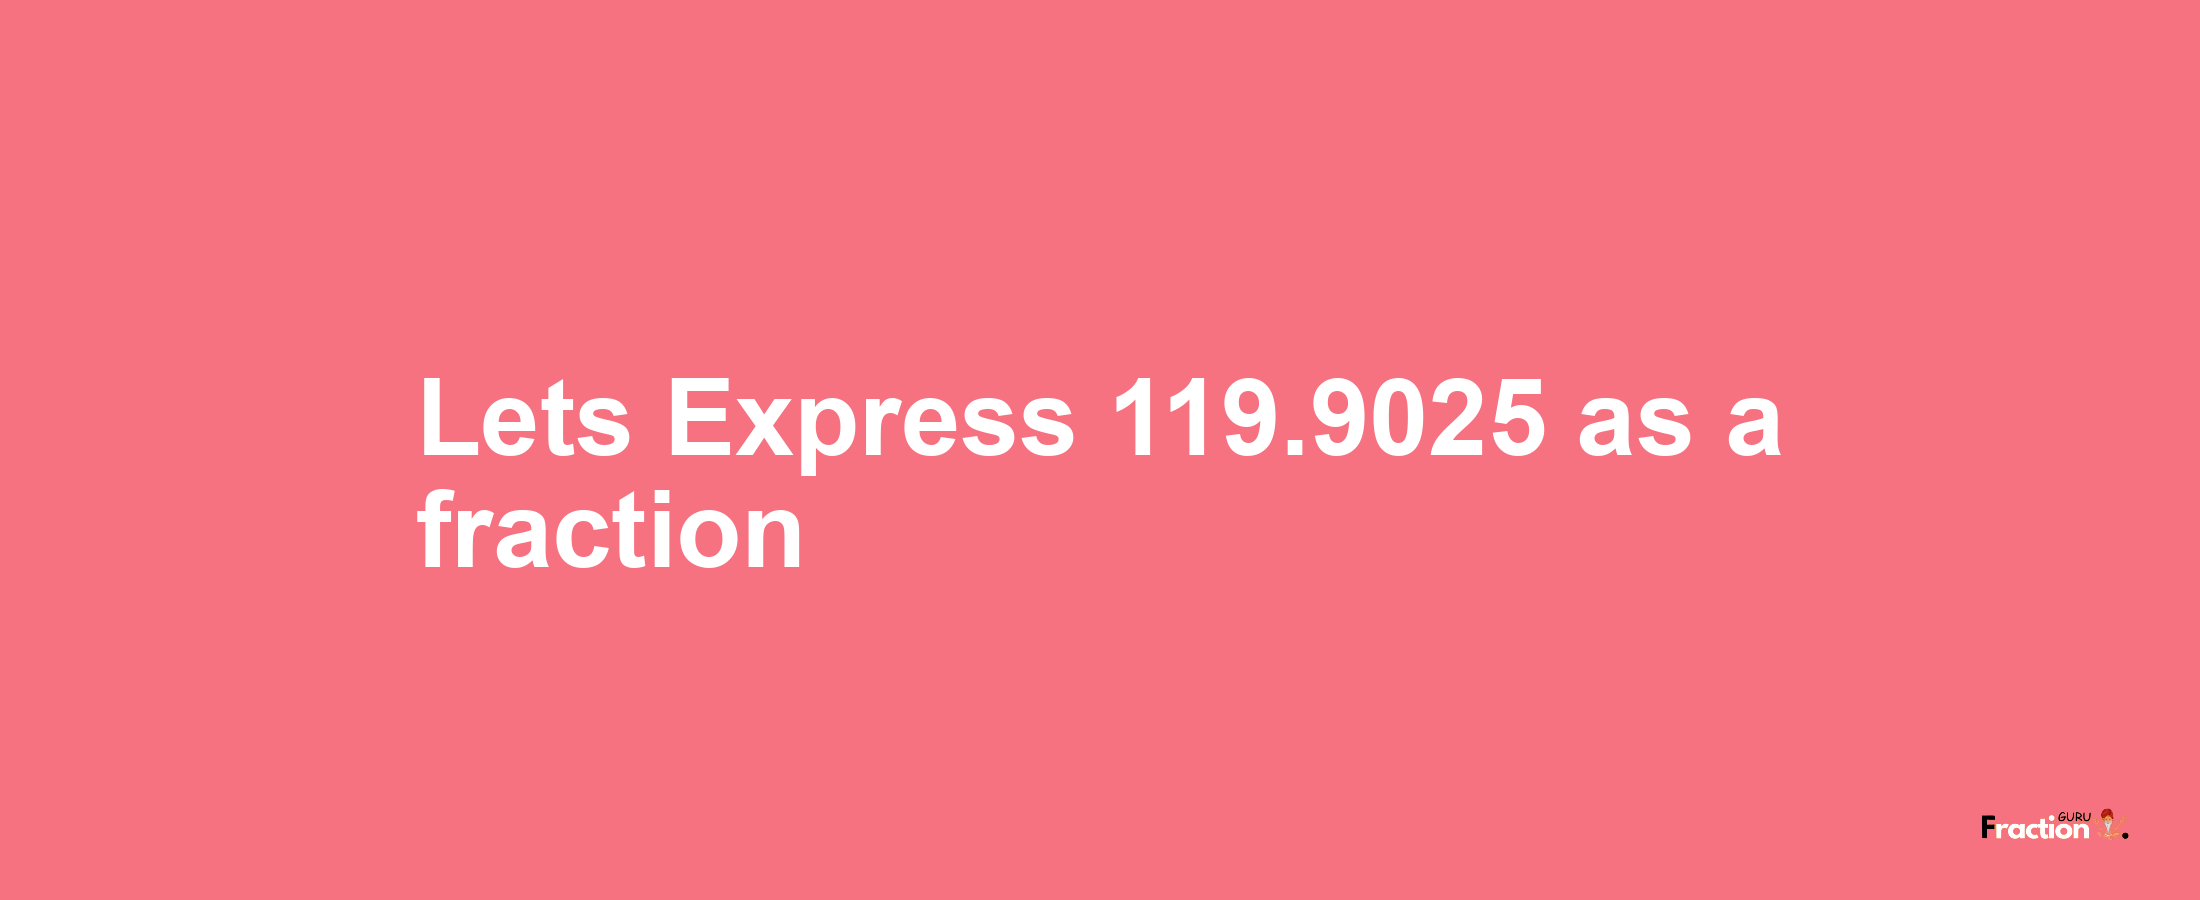 Lets Express 119.9025 as afraction